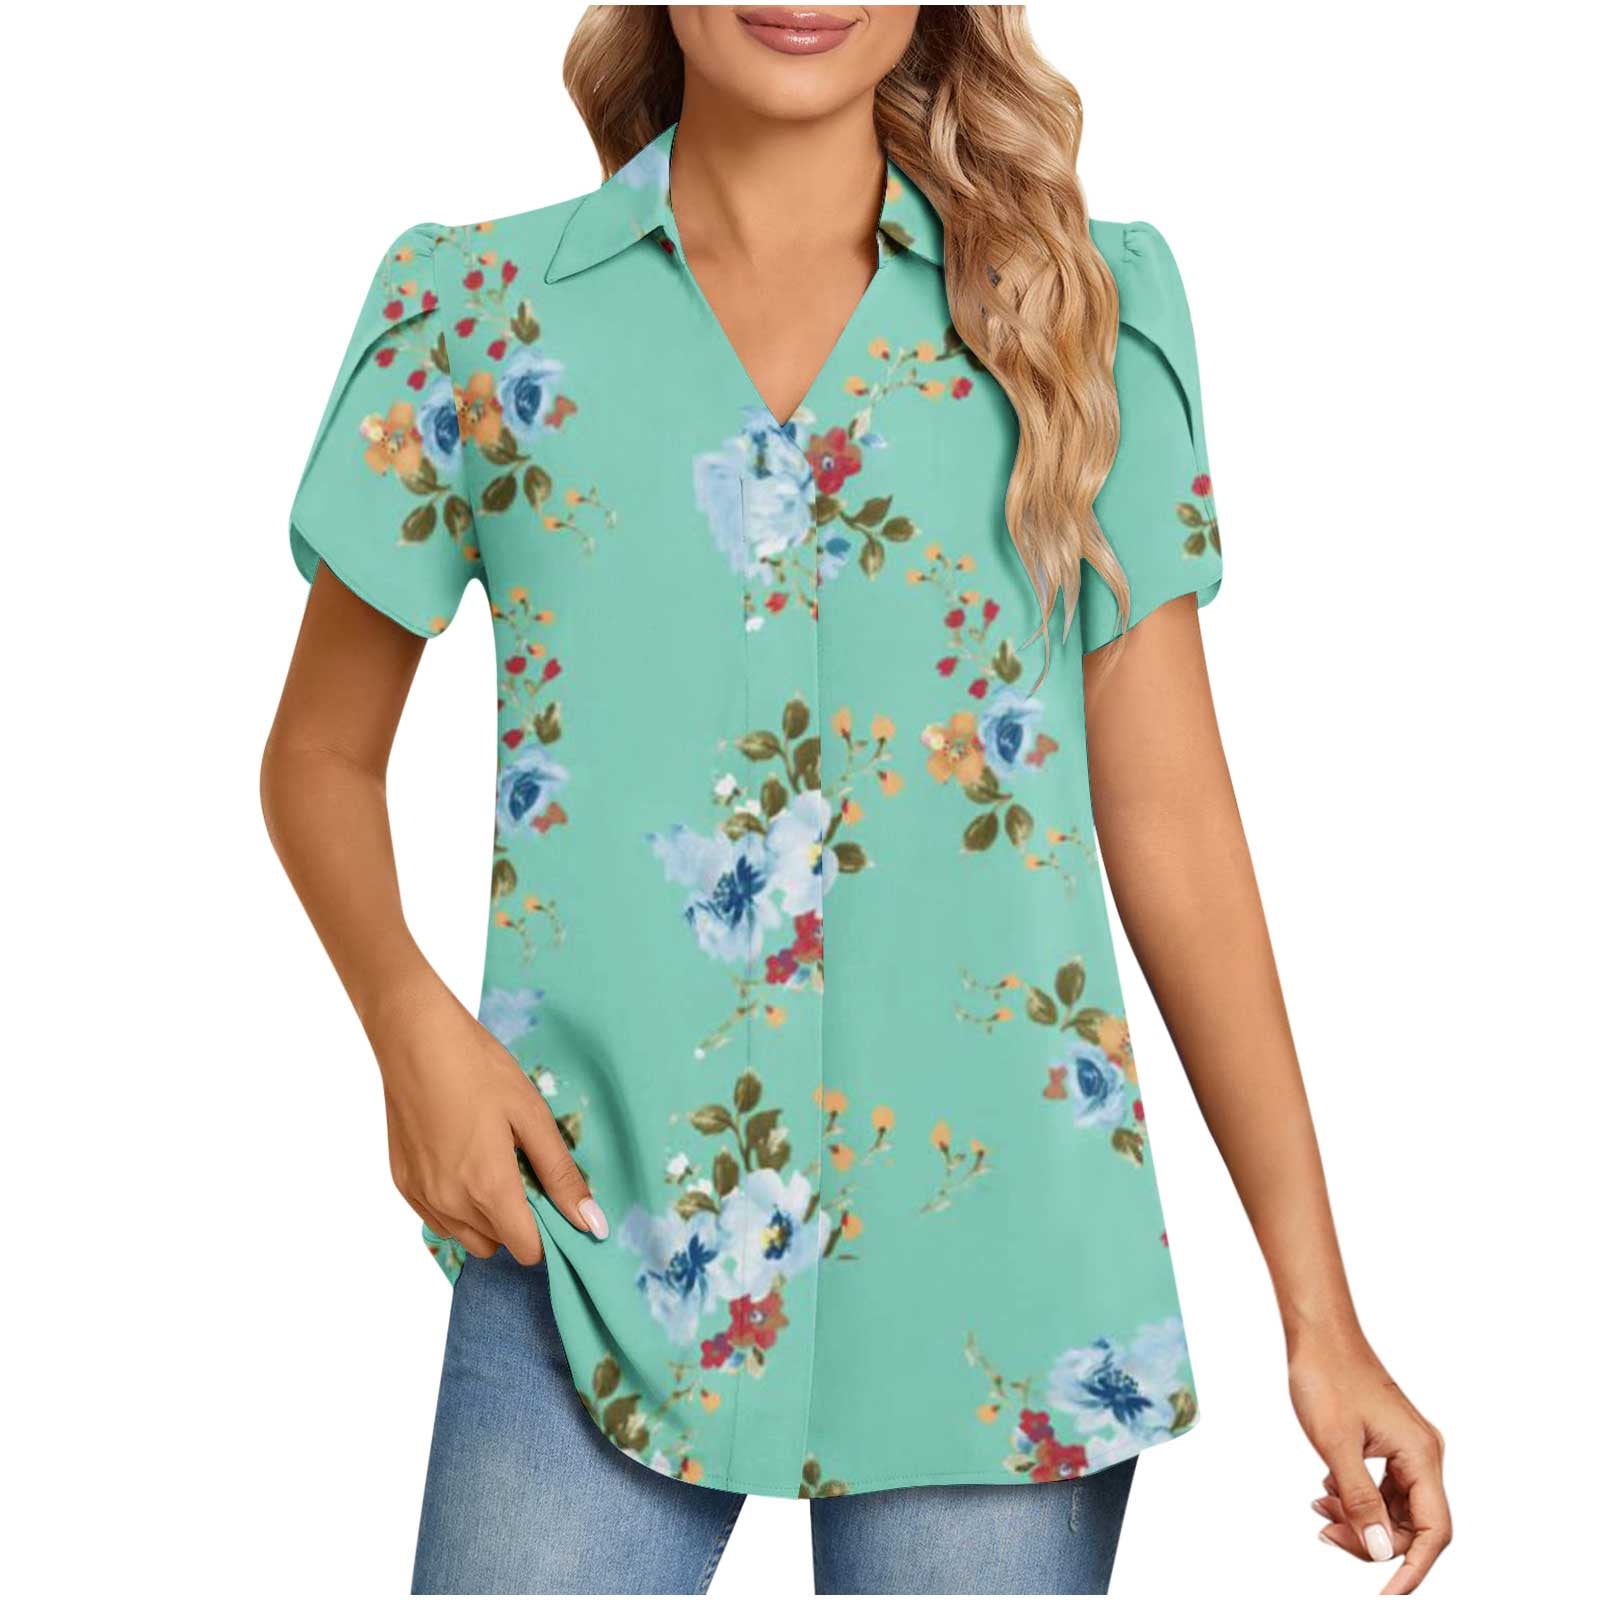 ZVAVZ 65 Polyester 35 Cotton Tshirts Work Tops for Women Tunic Going Out  Blouse Sexy Casual Vintage Tops Short Sleeve Tees Shirts Blusas de Mujer  Elegantes 